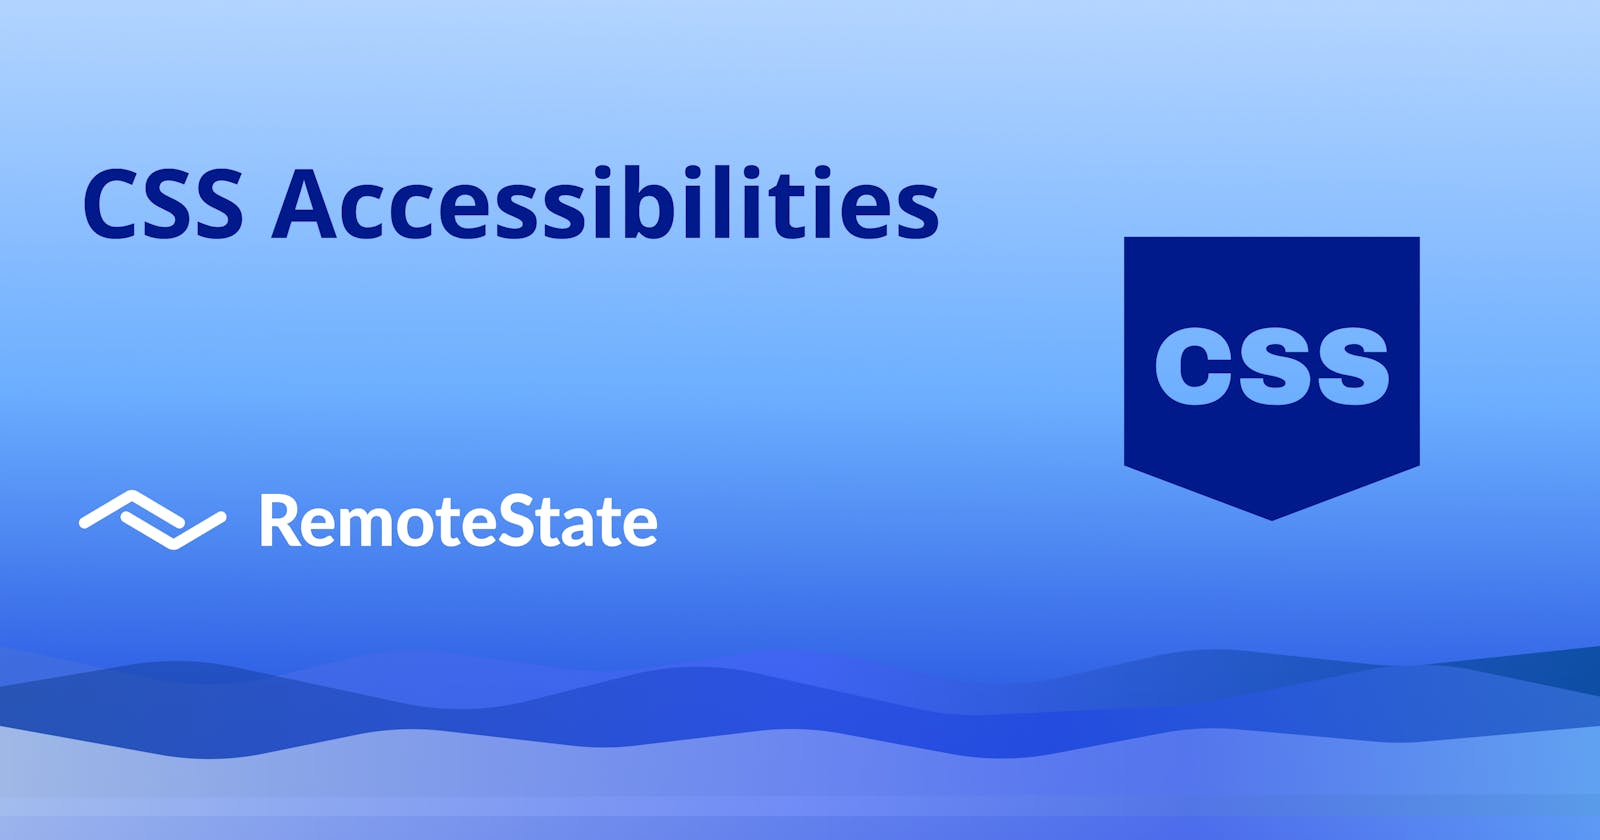 CSS Accessibilities